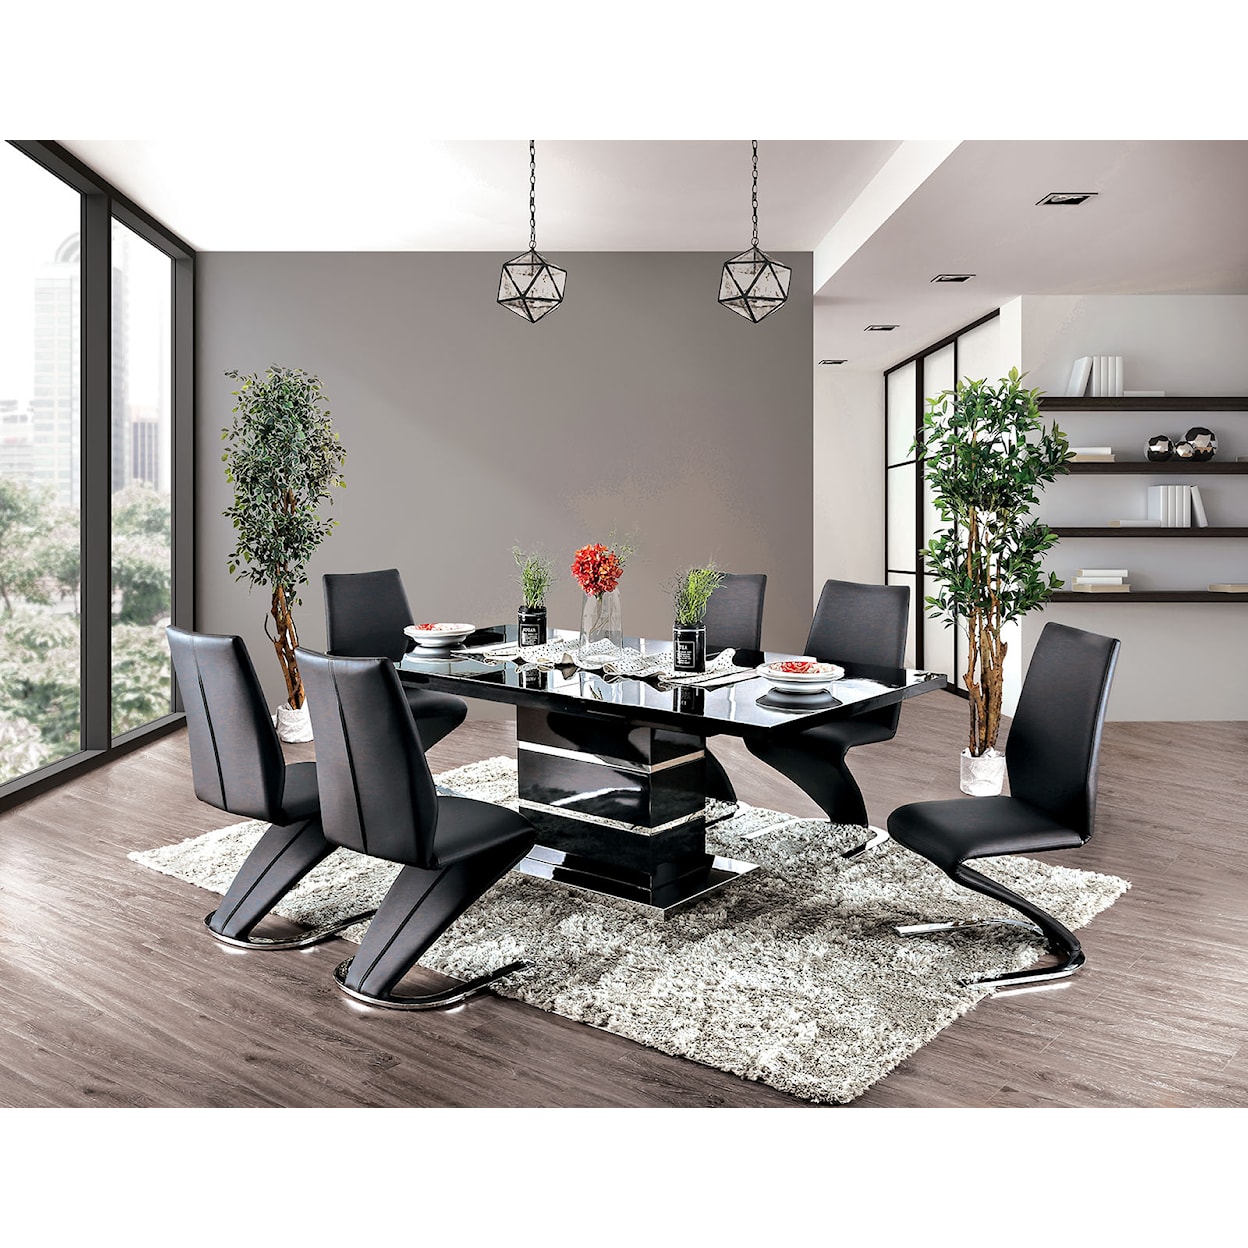 Furniture of America Midvale 7-Piece Dining Table Set